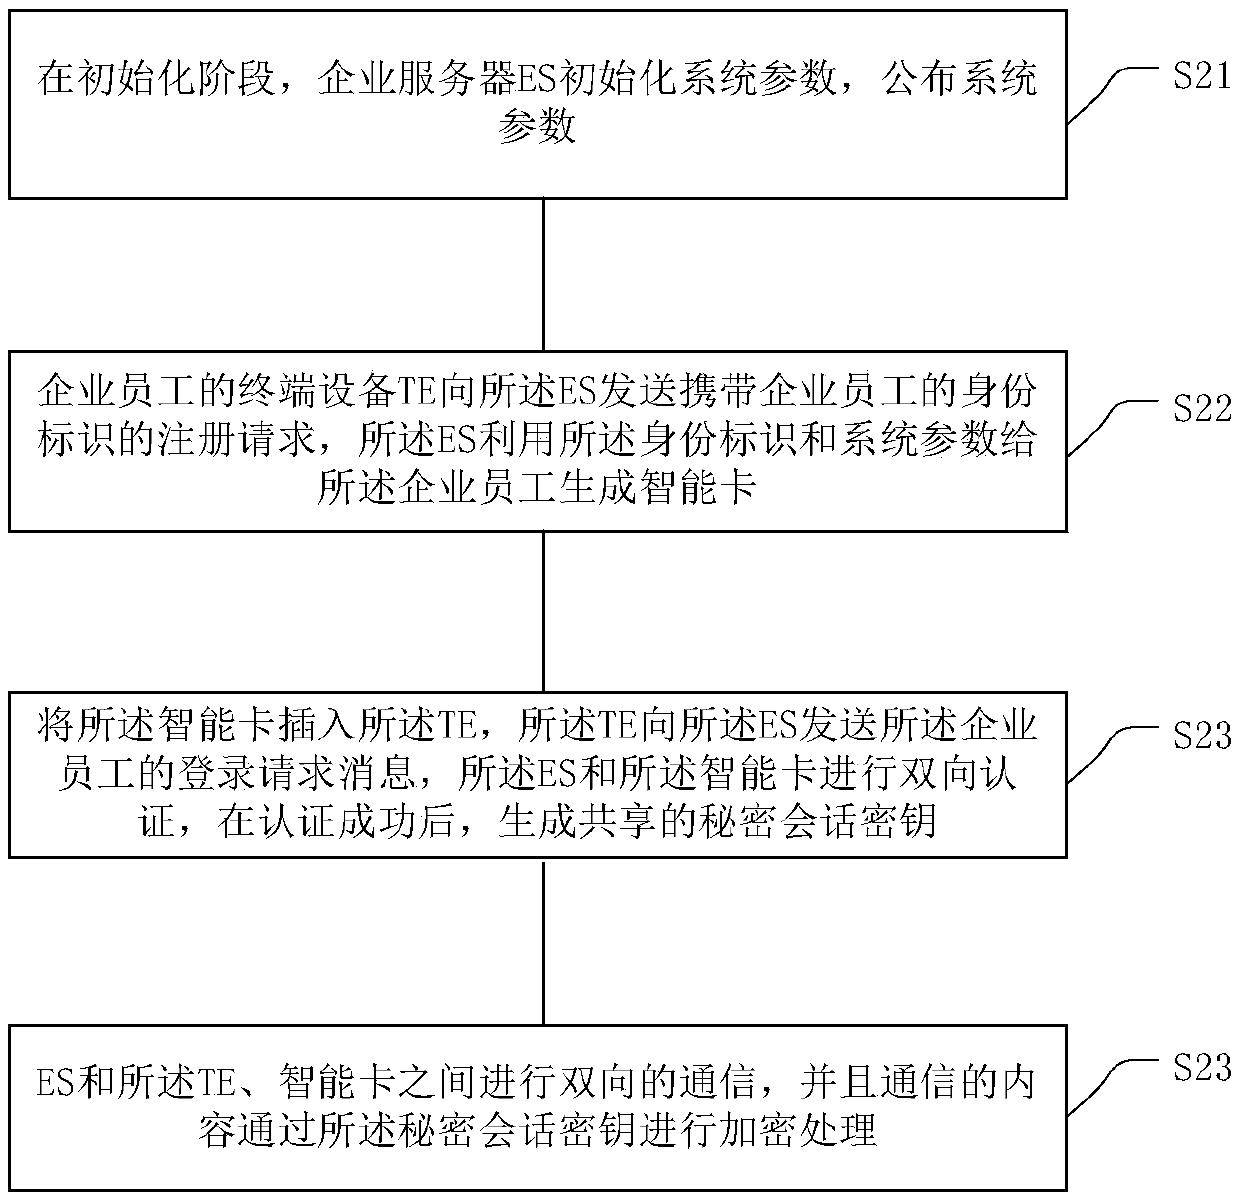 Multi-factor strong identity authentication method in mobile office environment